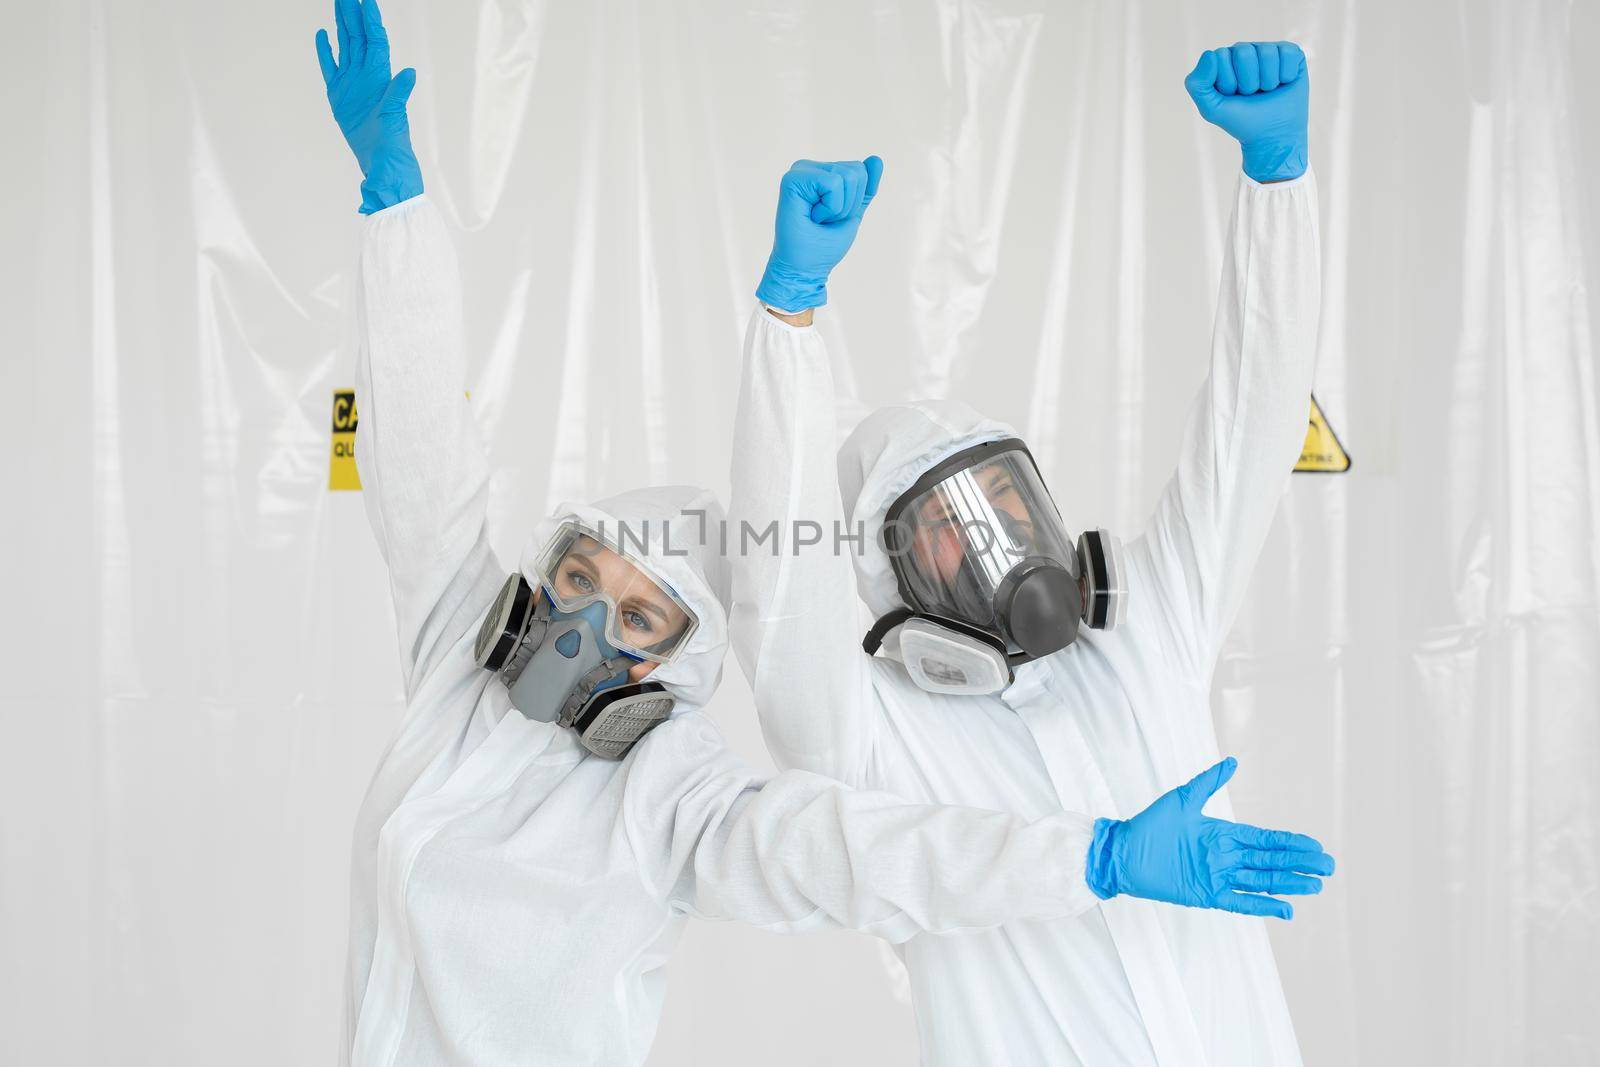 Portraits of a doctor: a man and a woman in protective suits and respirators, wearing gloves, having fun during quarantine. Covid-19 by StudioPeace